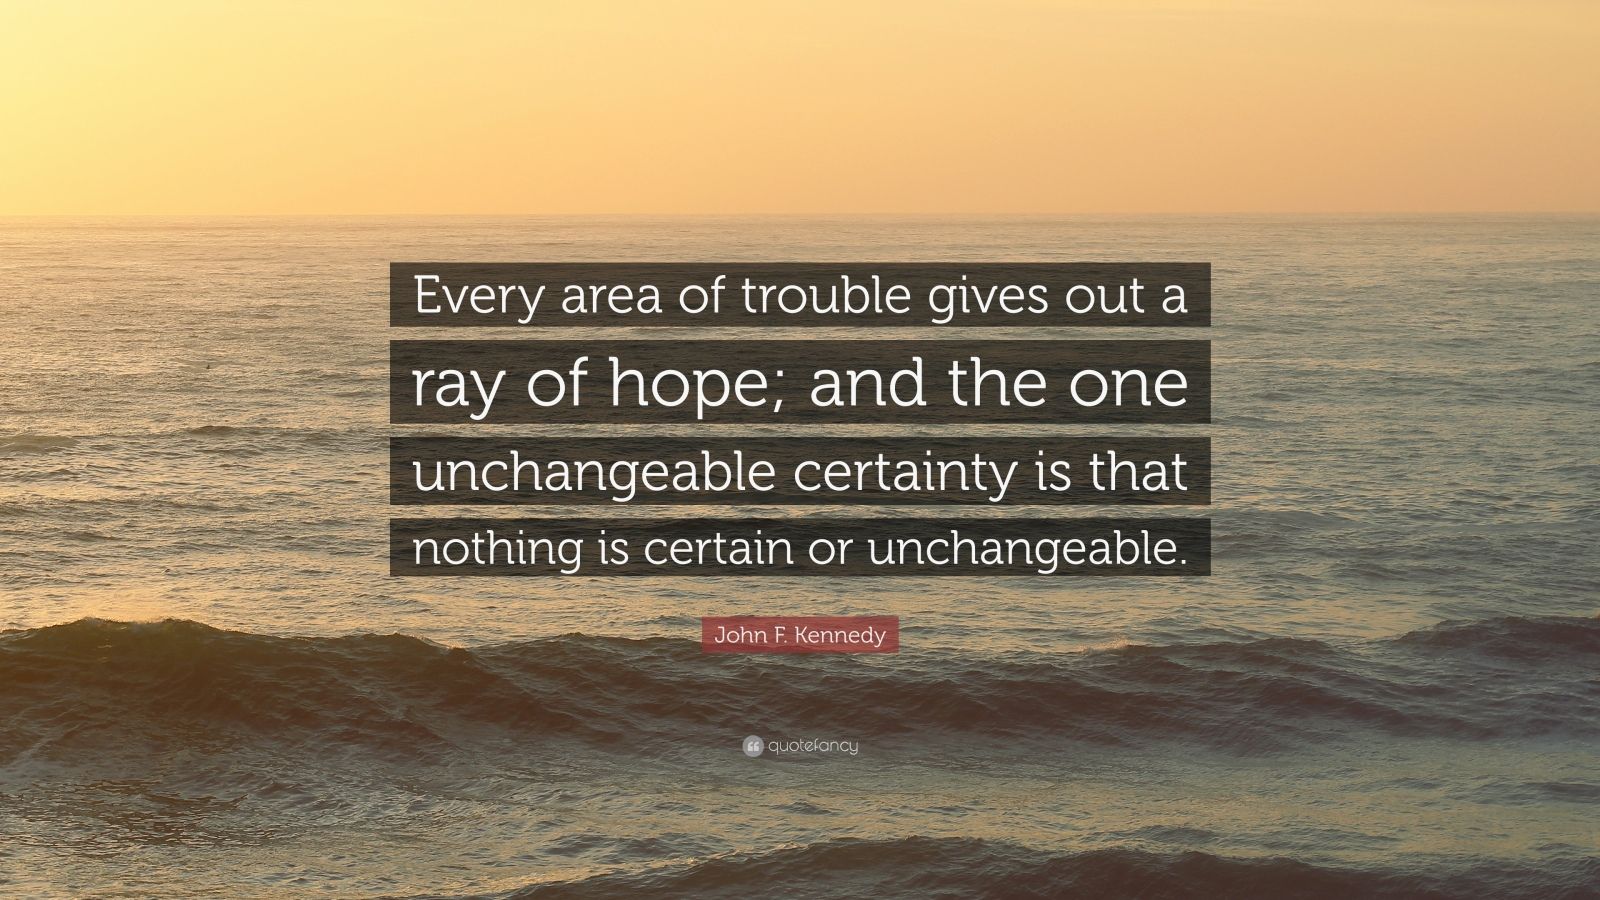 John F. Kennedy Quote: “Every area of trouble gives out a ray of hope ...